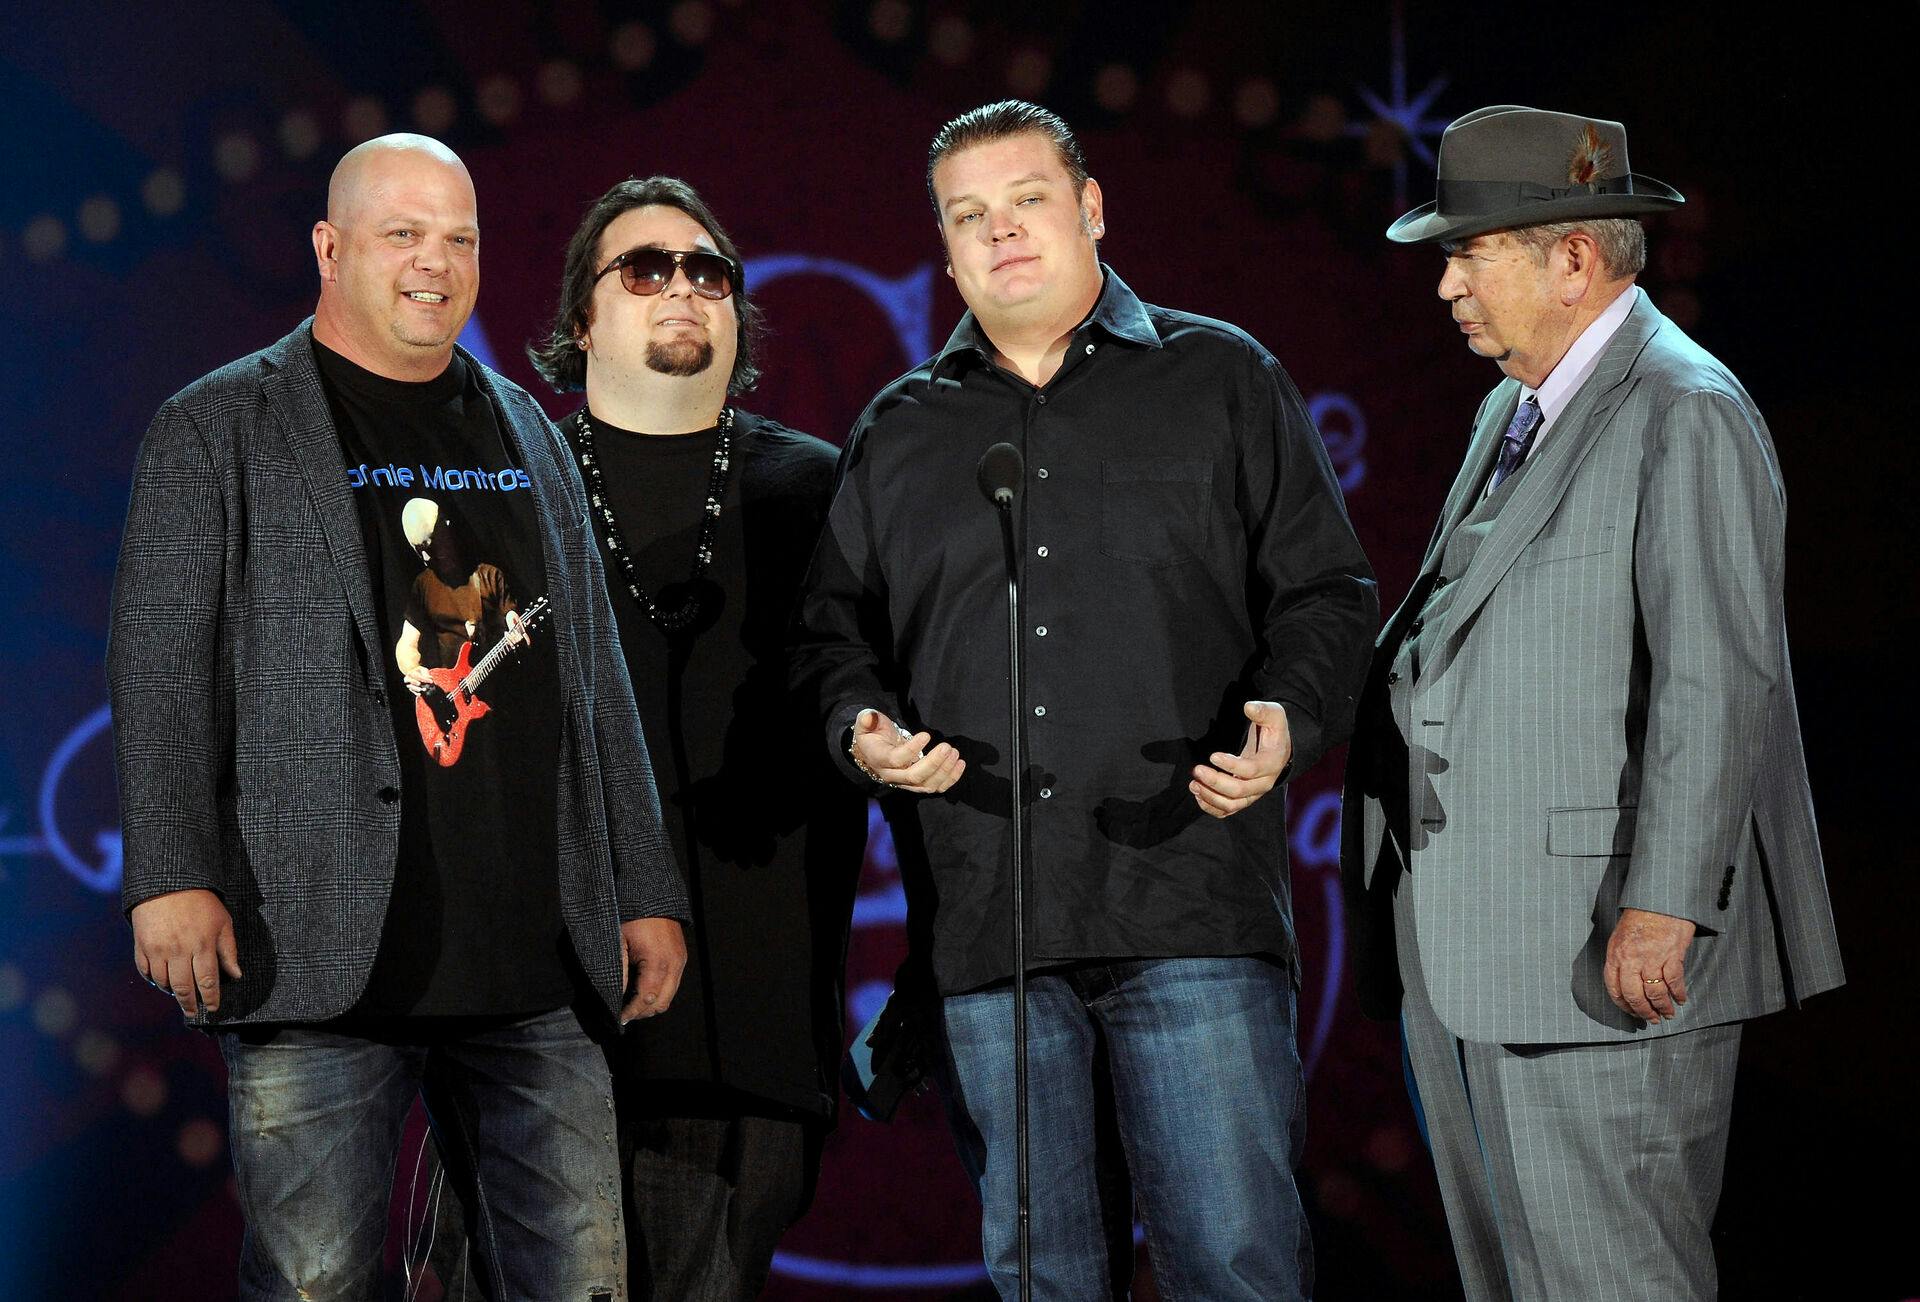 LAS VEGAS, NV - DECEMBER 5: (L-R) Rick Harrison, Austin 'Chumlee' Russell, Corey Harrison and Richard Harrison of "Pawn Stars" onstage at the 2011 American Country Awards at the MGM Grand Hotel & Casino's Grand Garden Arena on December 5, 2011 in Las Vegas, Nevada. The show airs live at 8:00-10:00PM ET/PT on FOX. (Photo by Frank Micelotta/Invision/AP)